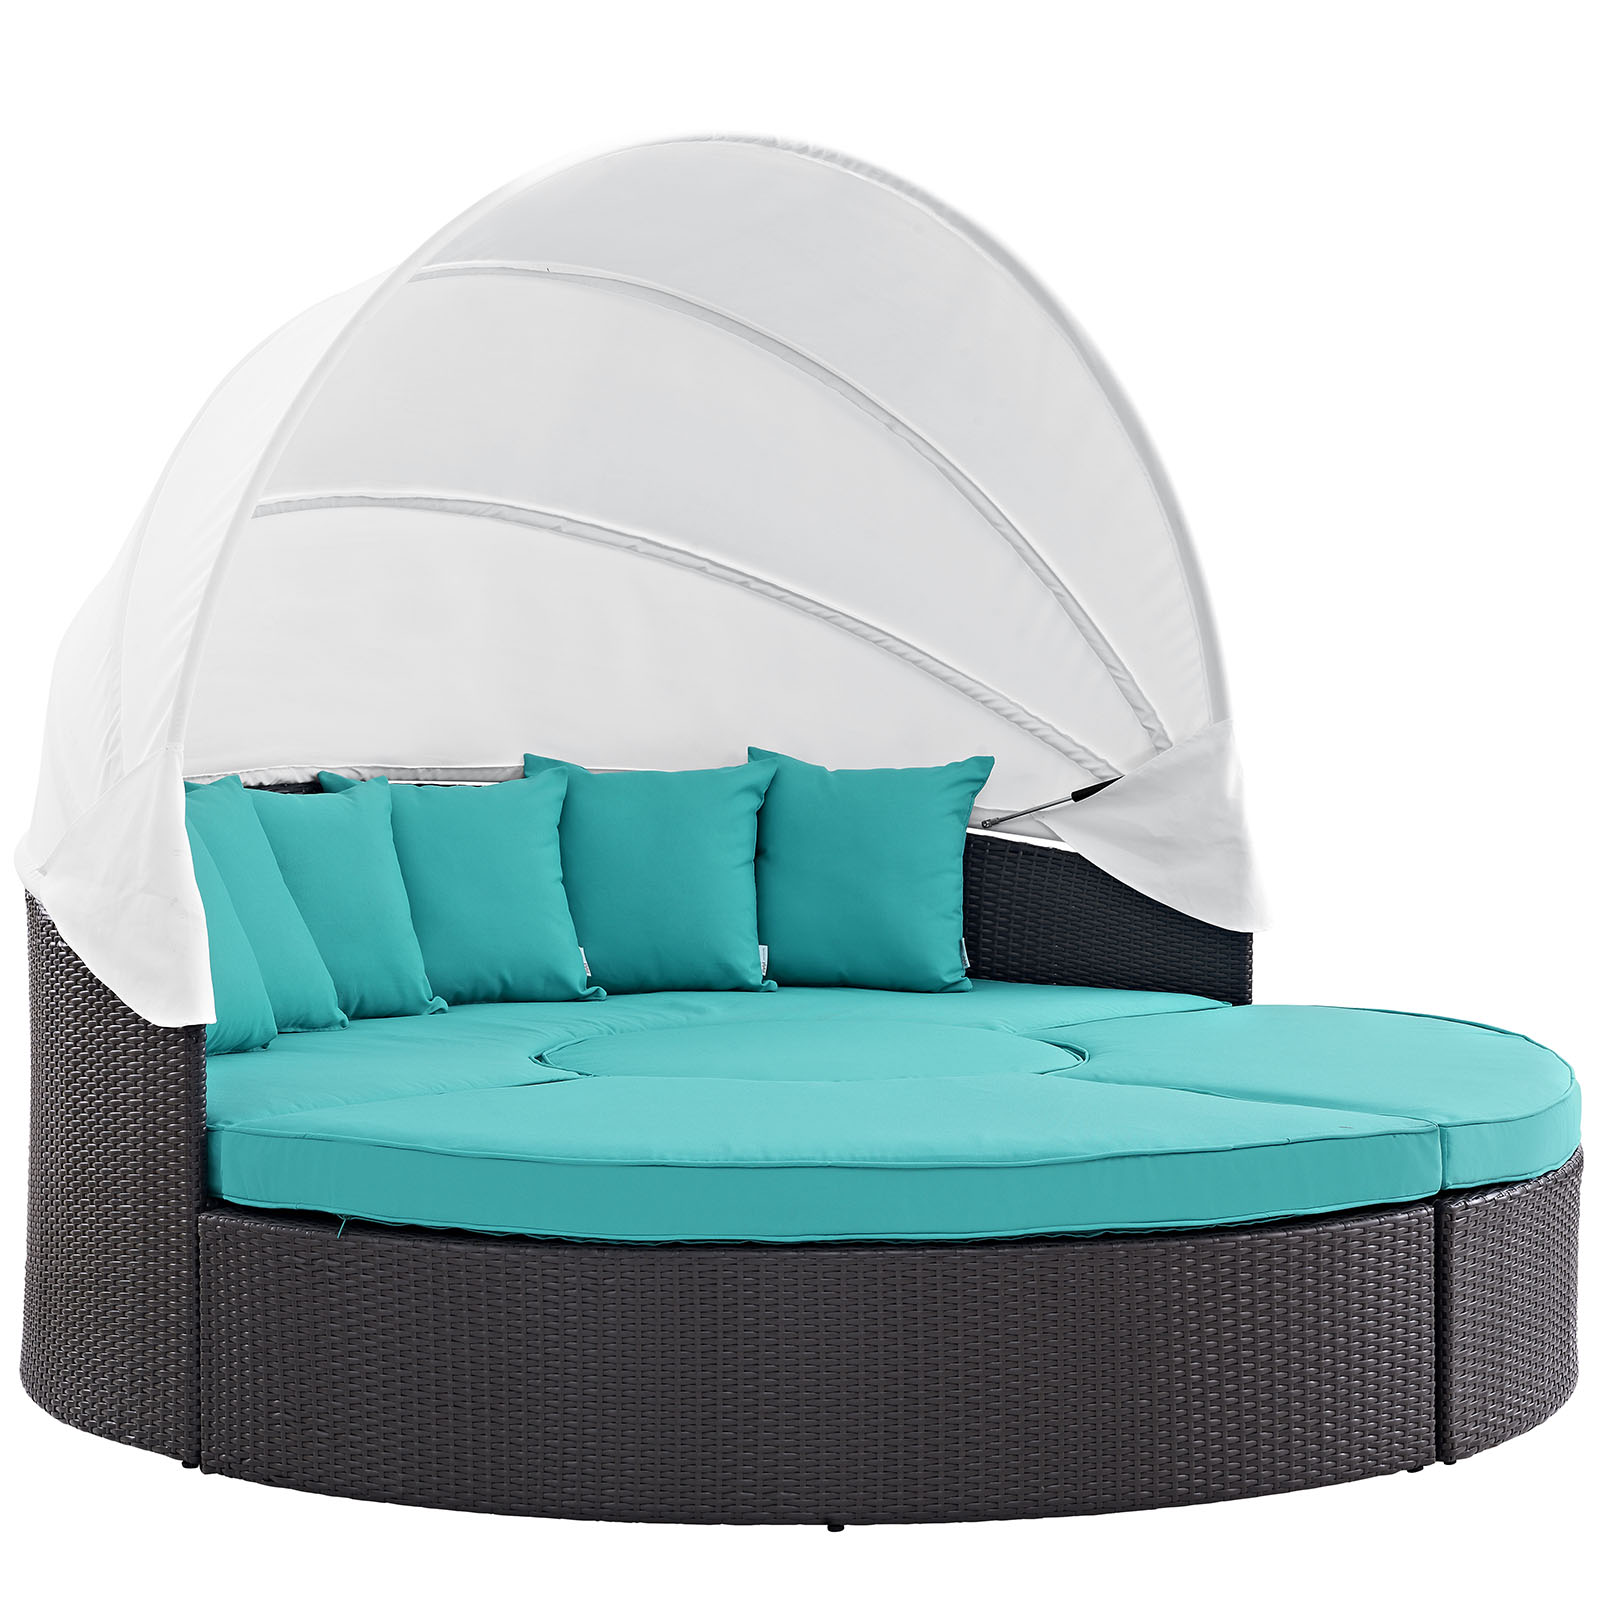 Modway Convene Canopy Outdoor Patio Daybed in Espresso Turquoise - image 2 of 6